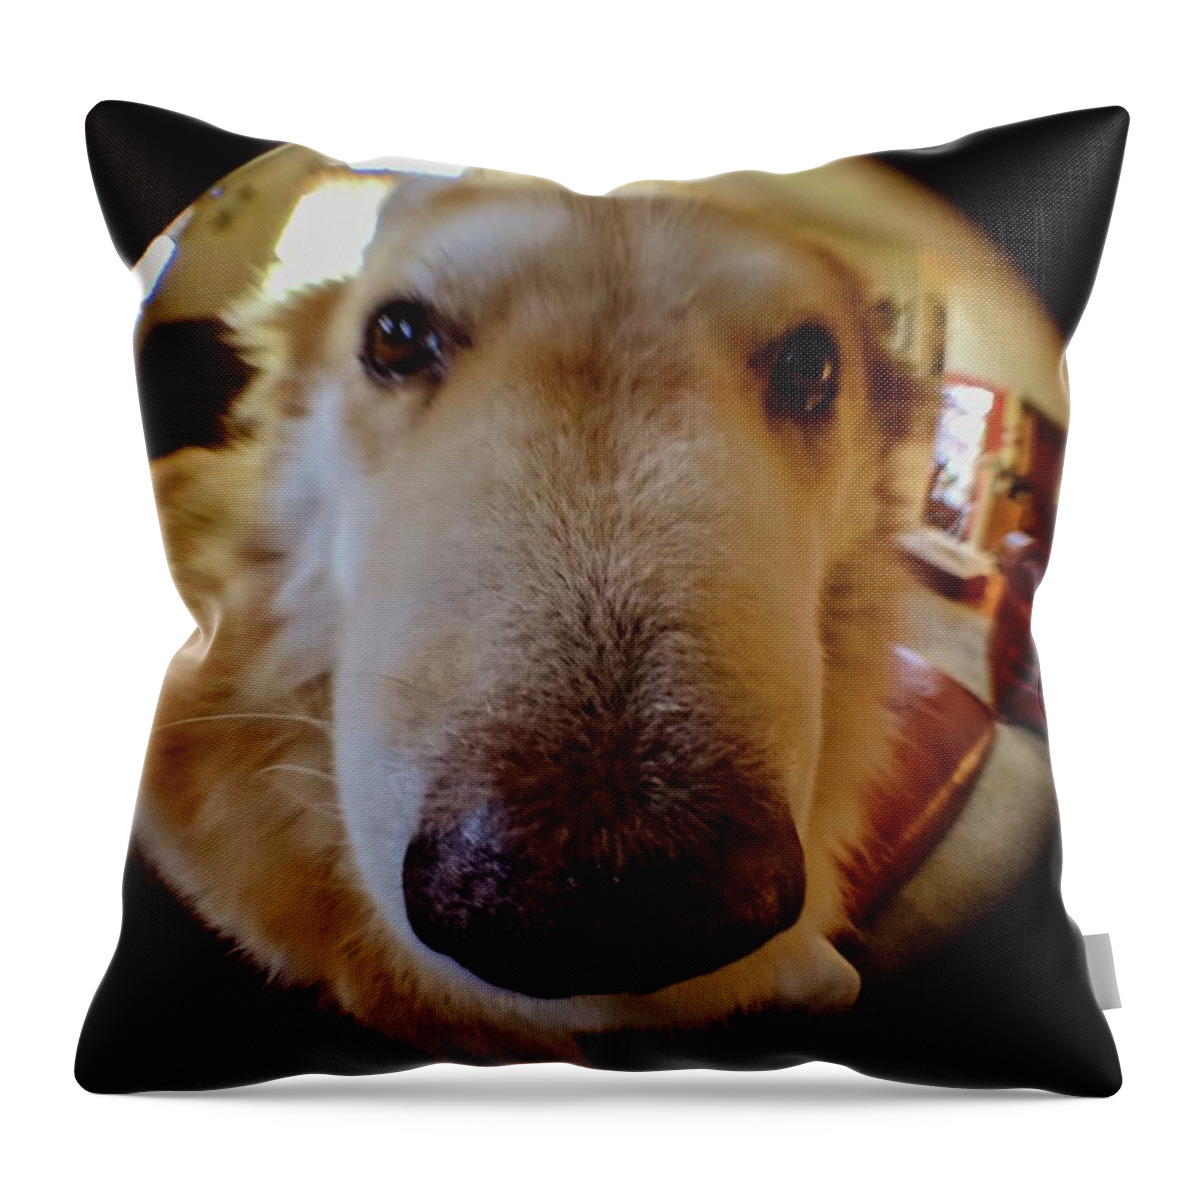  Throw Pillow featuring the photograph Close In Doggy by Brad Nellis